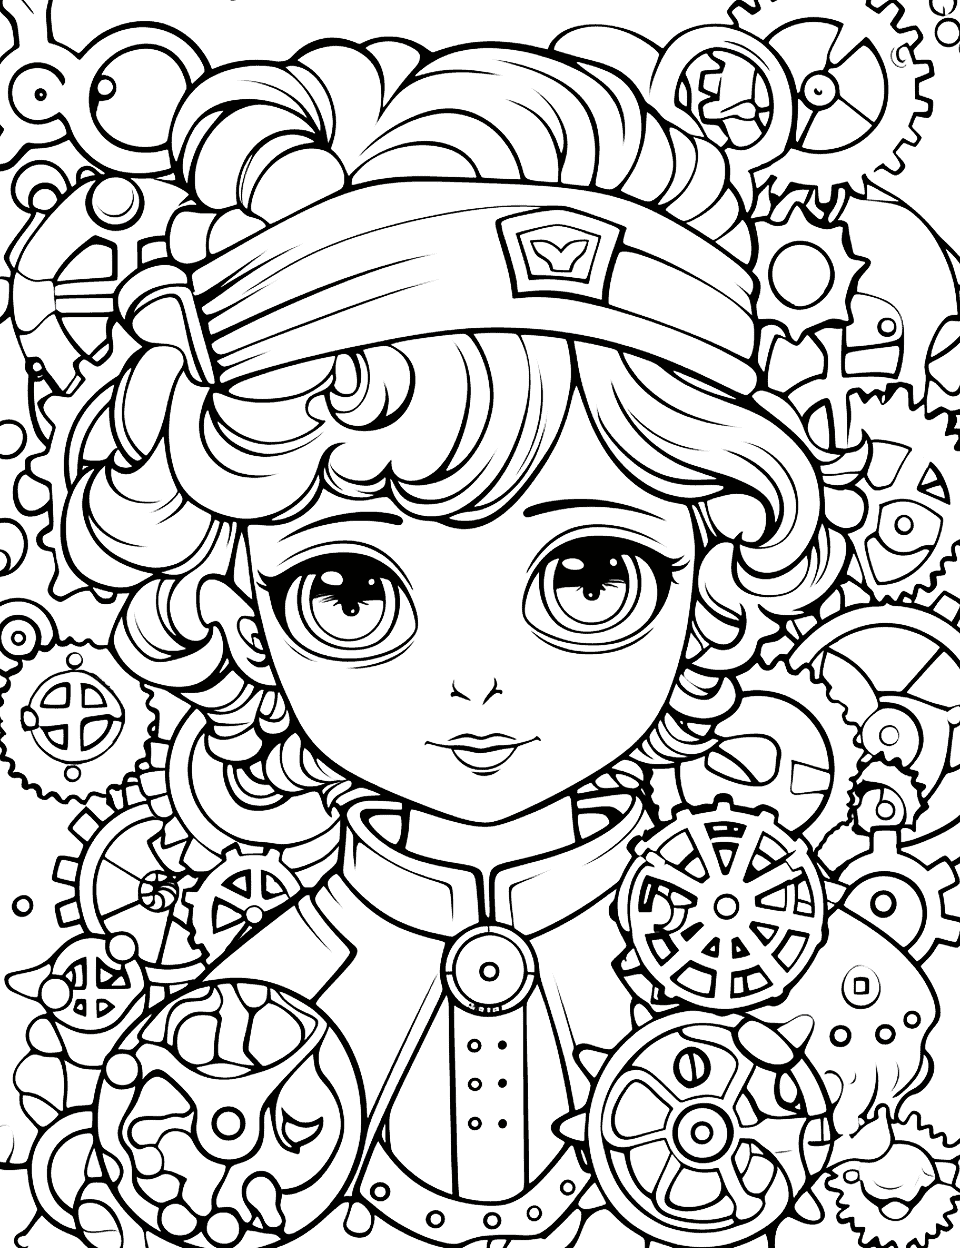 Kawaii Steampunk Adventure Adult Coloring Page - A kawaii-style cute character having an adventure in a steampunk city, surrounded by gears, springs, and machinery.